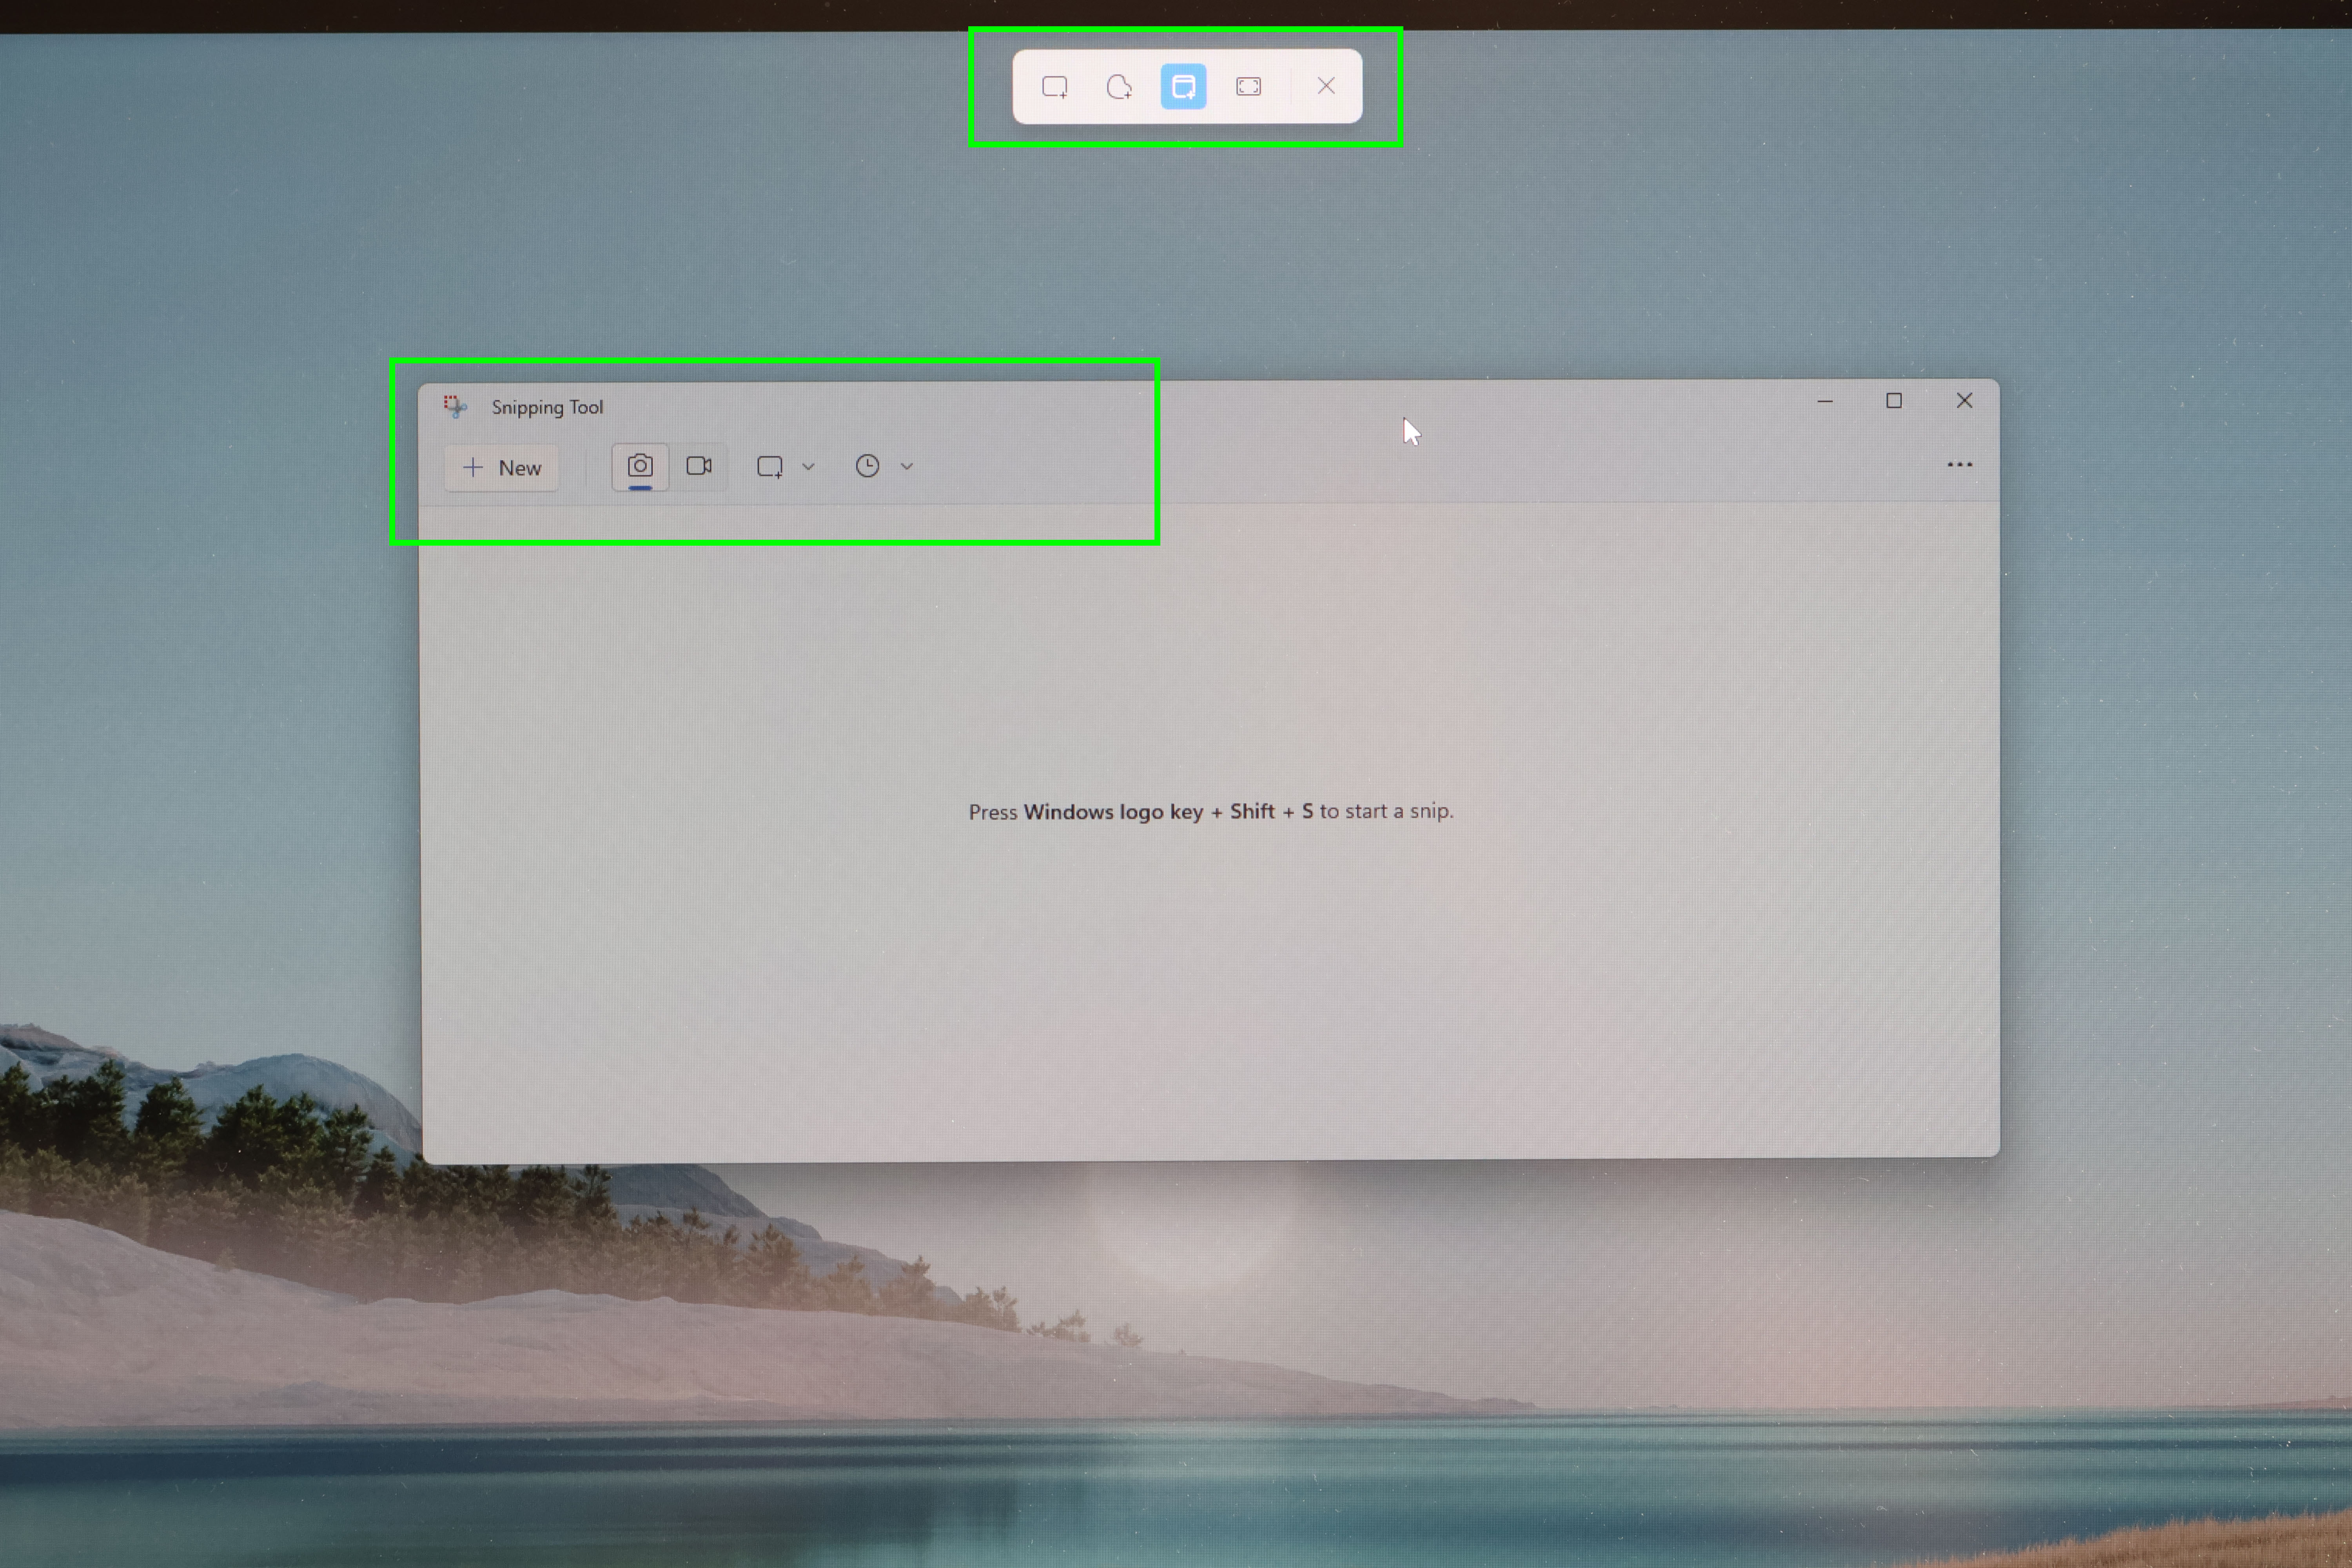 A screenshot demonstrating the benefits of Mac and/or Windows for productivity